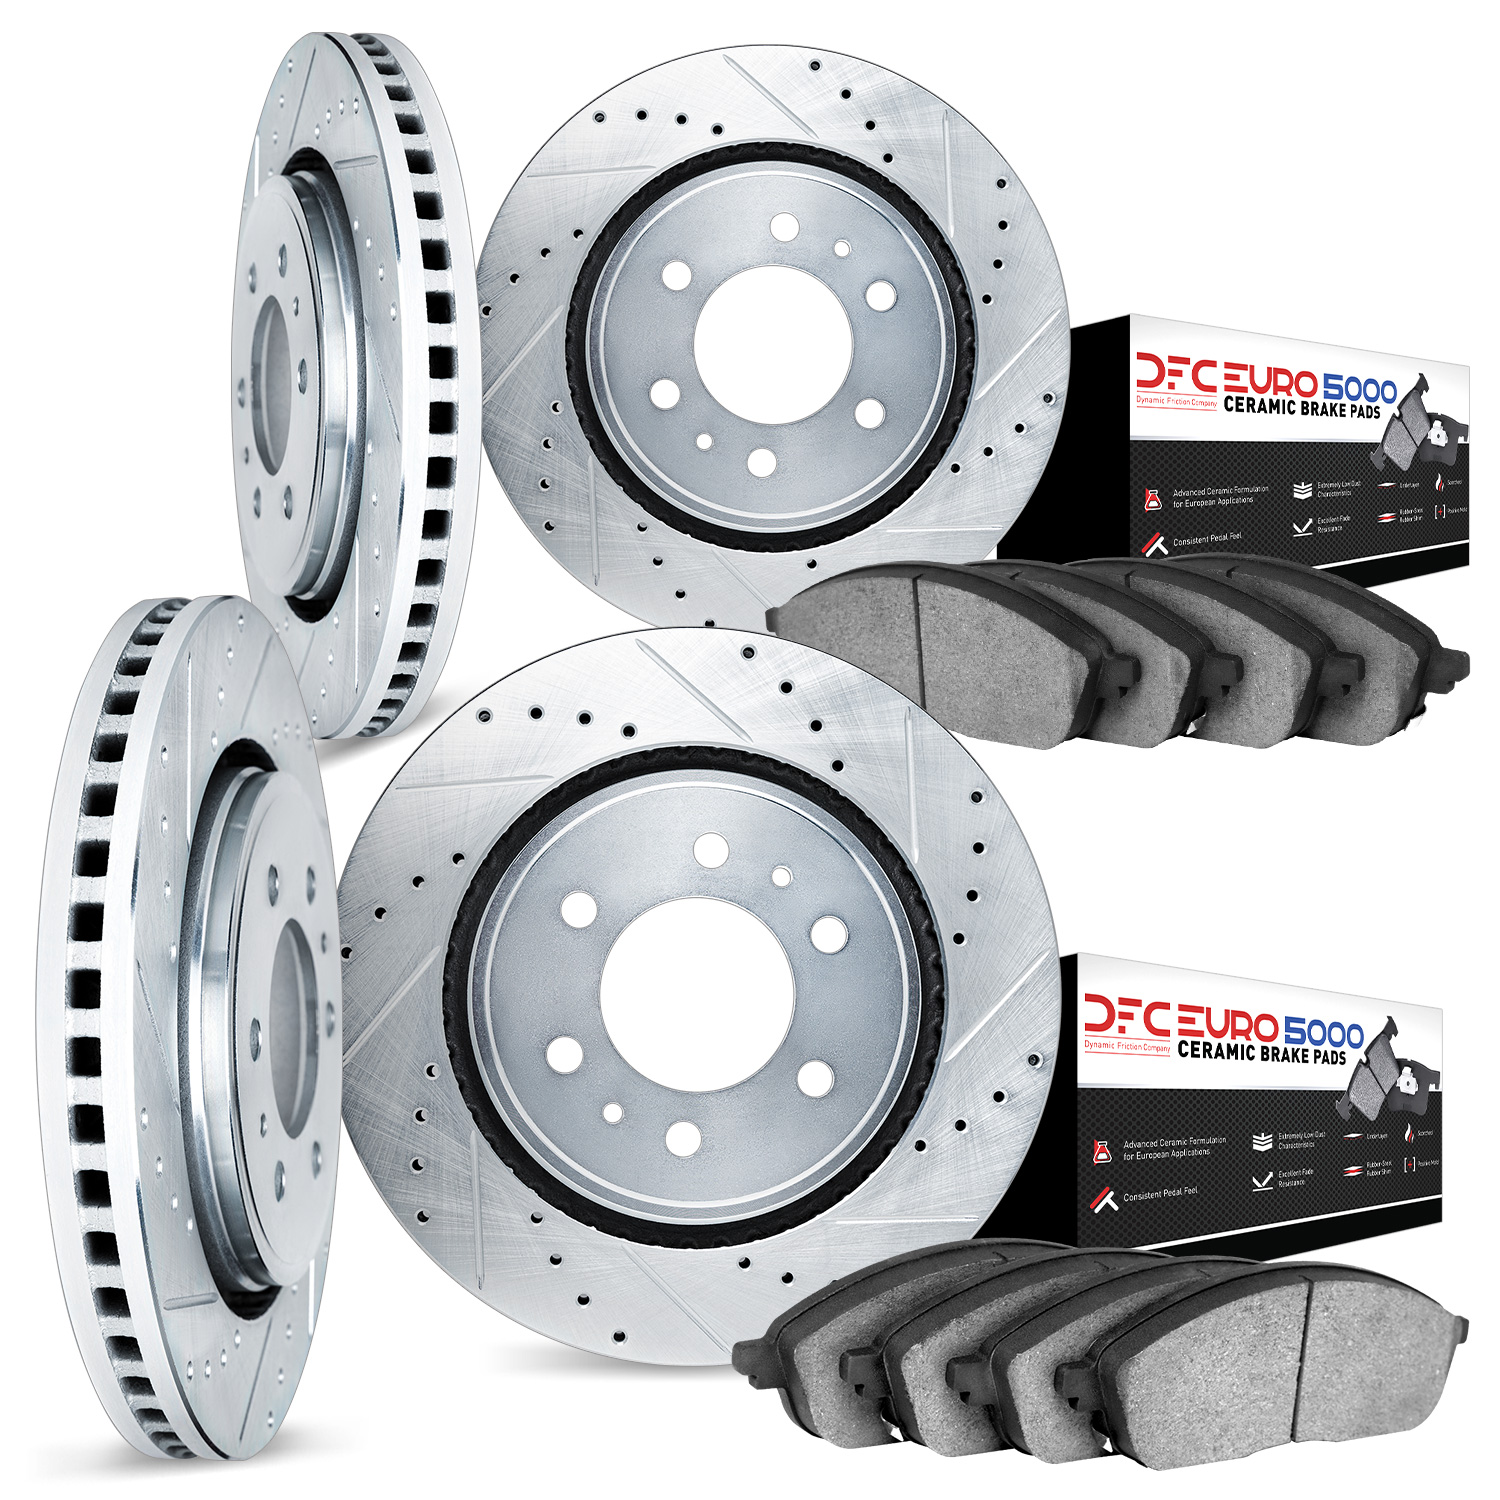 7604-48003 Drilled/Slotted Brake Rotors w/5000 Euro Ceramic Brake Pads Kit [Silver], 2006-2009 GM, Position: Front and Rear